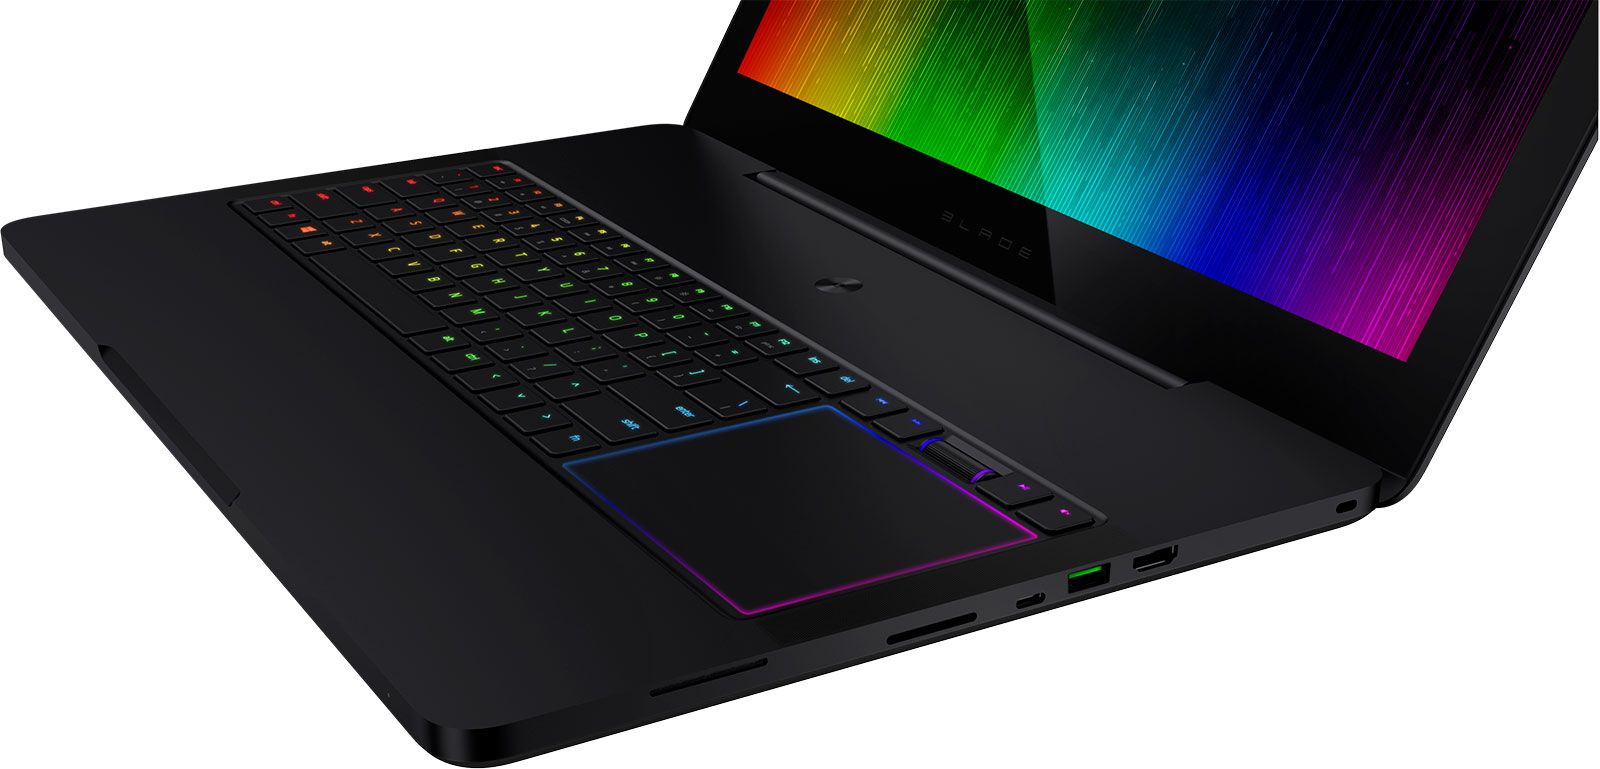 razer upgrades the blade pro laptop with thx certification and more powerful cpu image 2